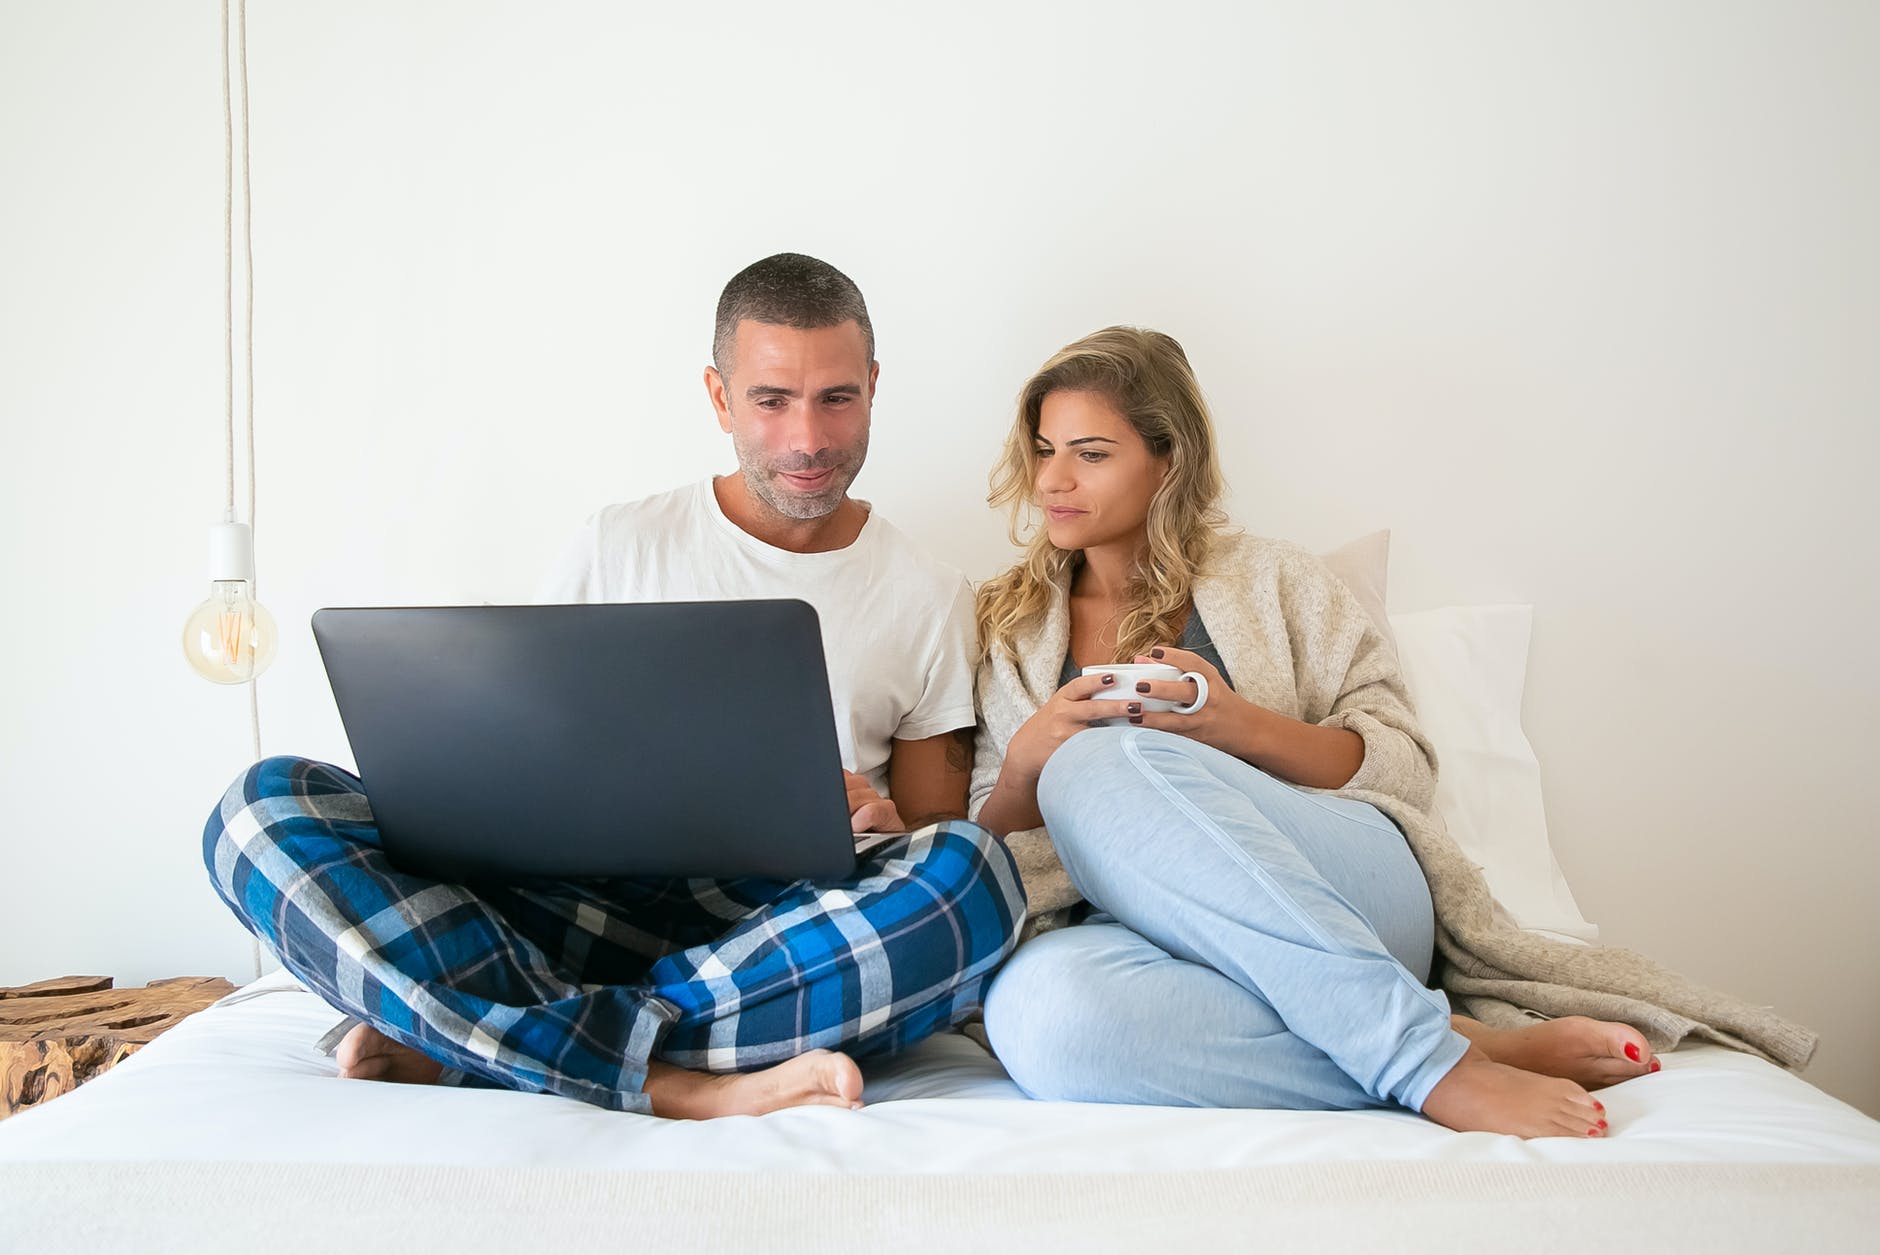 pad energije

man and woman sitting on bed while looking at the screen of a laptop